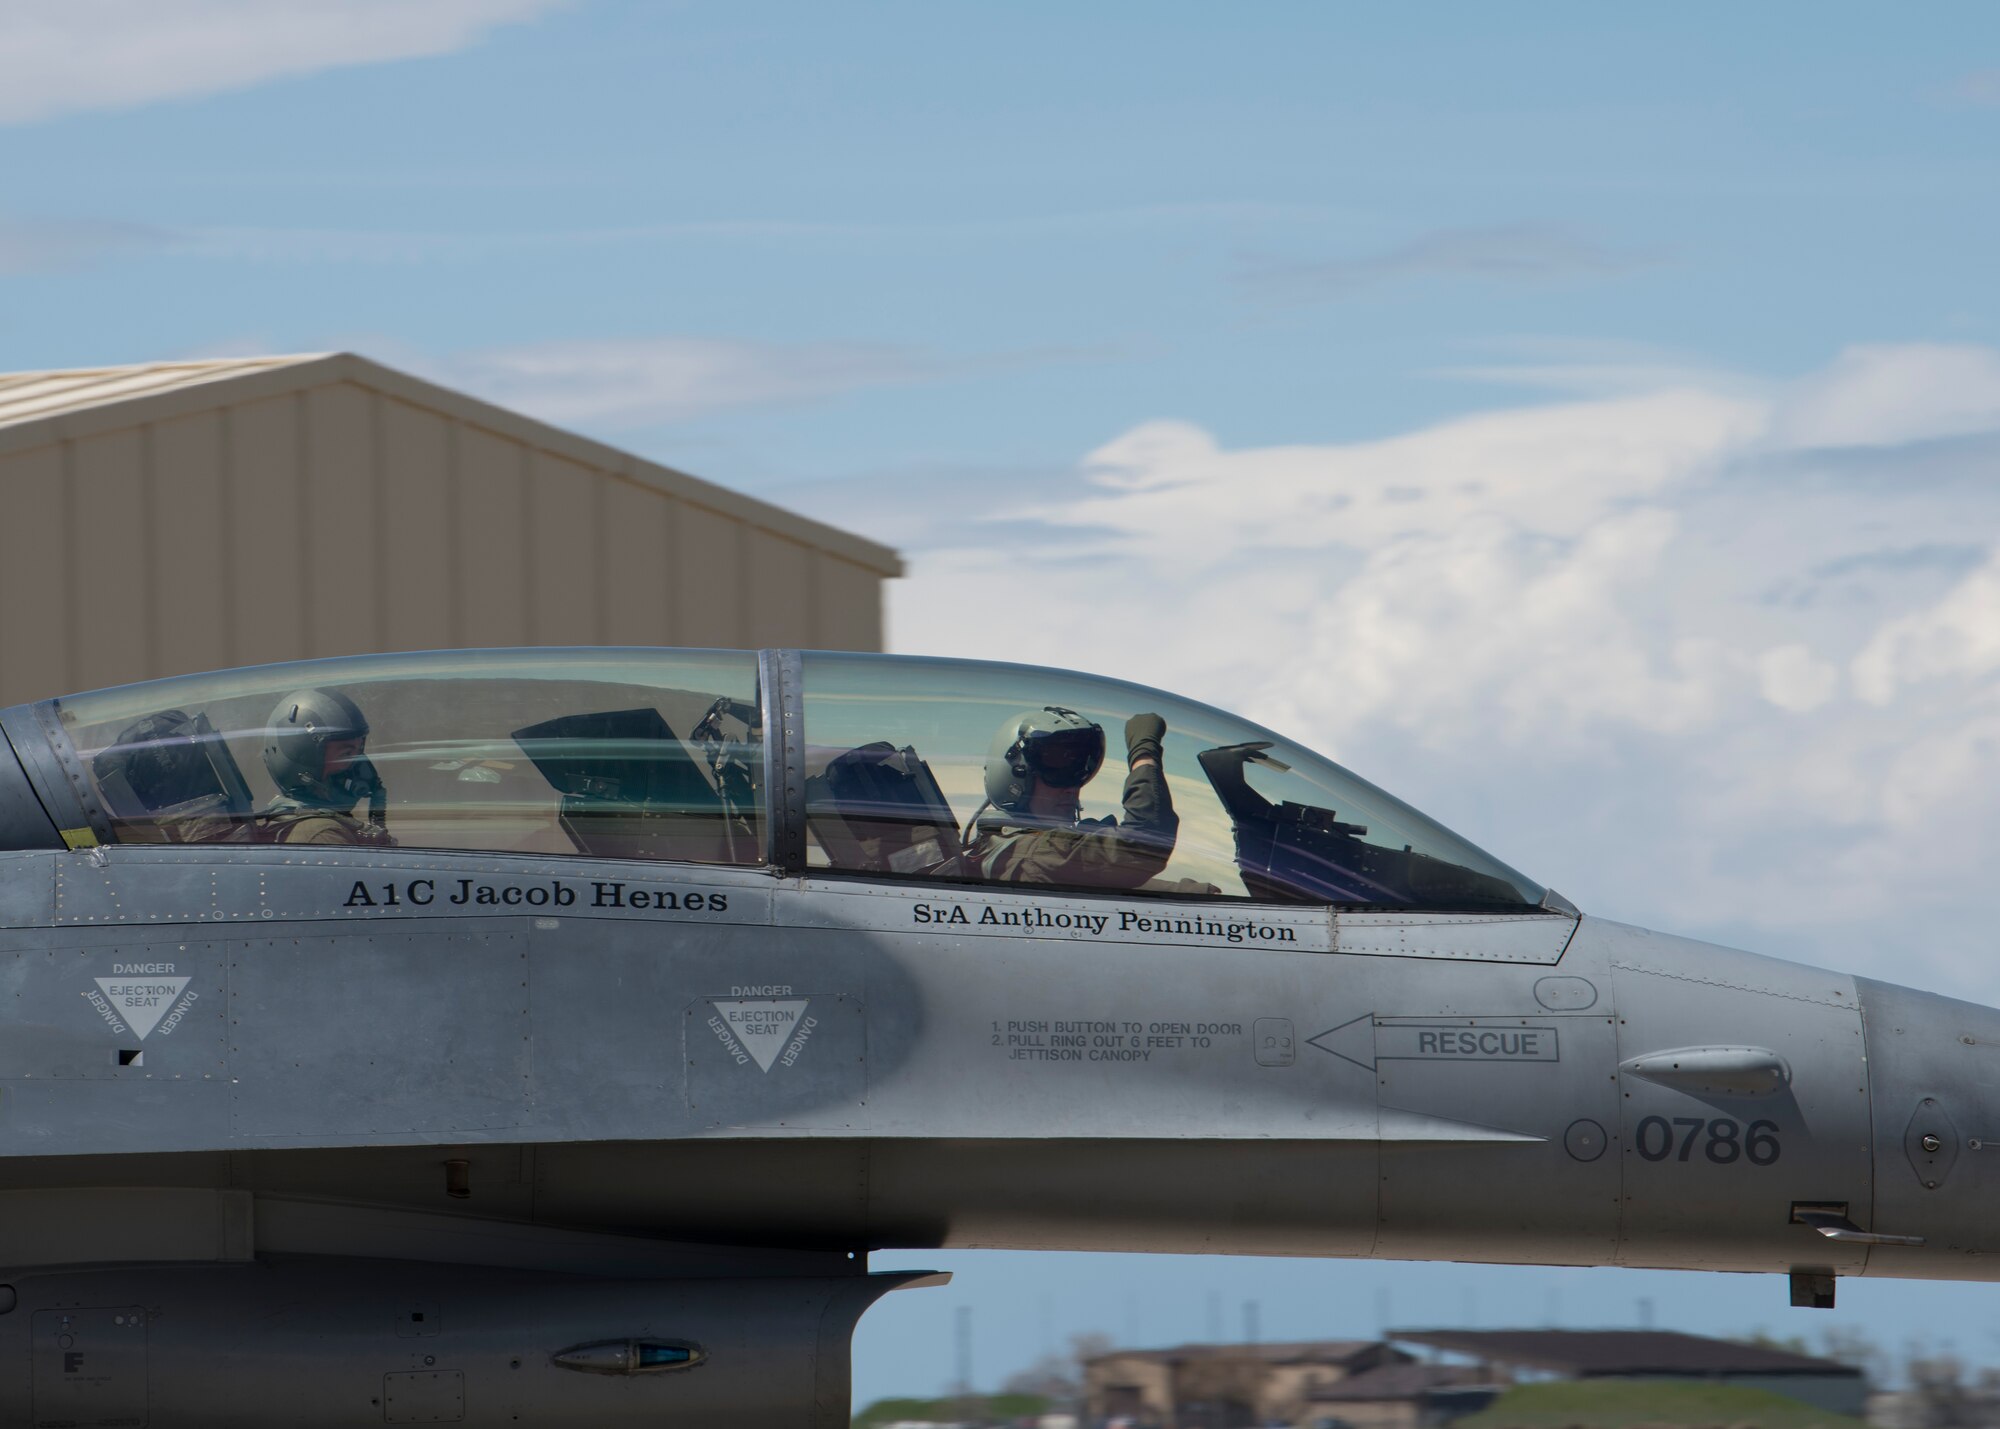 A 311th Fighter Squadron F-16 Viper pilot displays the squadron “Fangs Out” symbol as he taxis before takeoff, April 24, 2019, on Hill Air Force Base, Utah. Between April 22 and May 3, the 311th FS conducted 174 sorties in support of student pilot training and dissimilar air combat training with the F-35 Lightning II. (U.S. Air Force photo by Staff Sgt. BreeAnn Sachs)